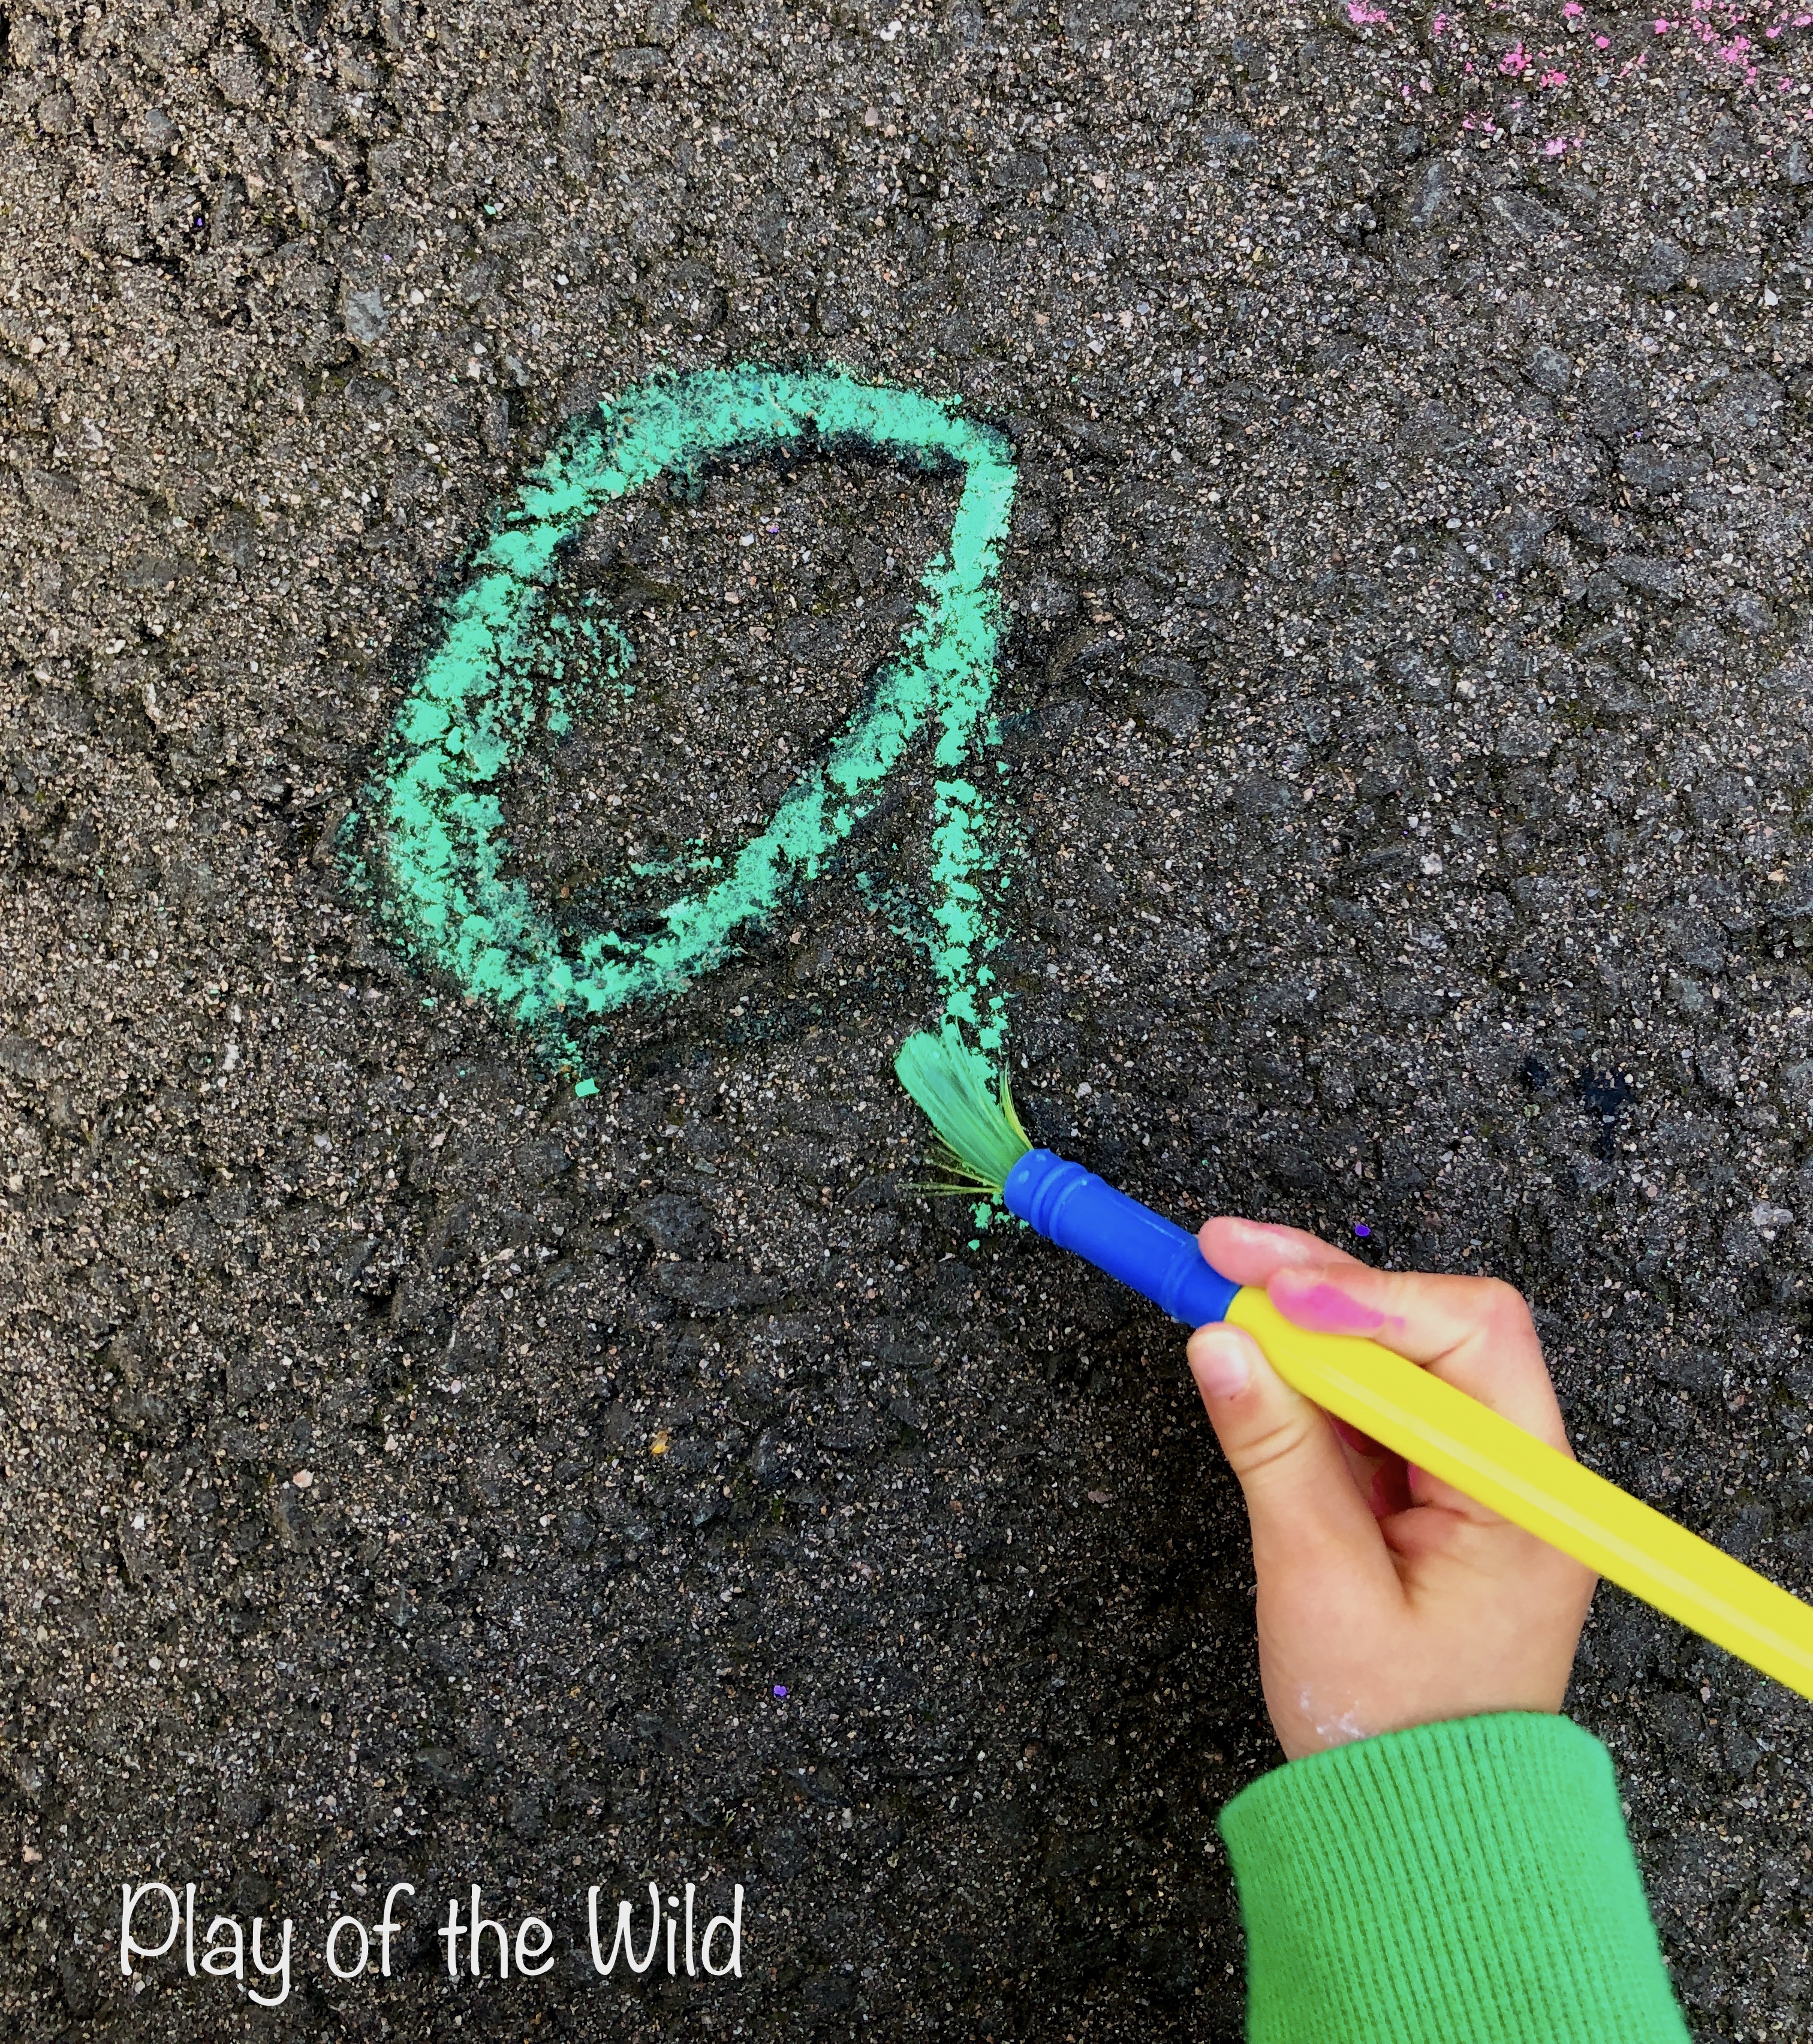 EYFS Activities for Toddlers and Preschoolers at home